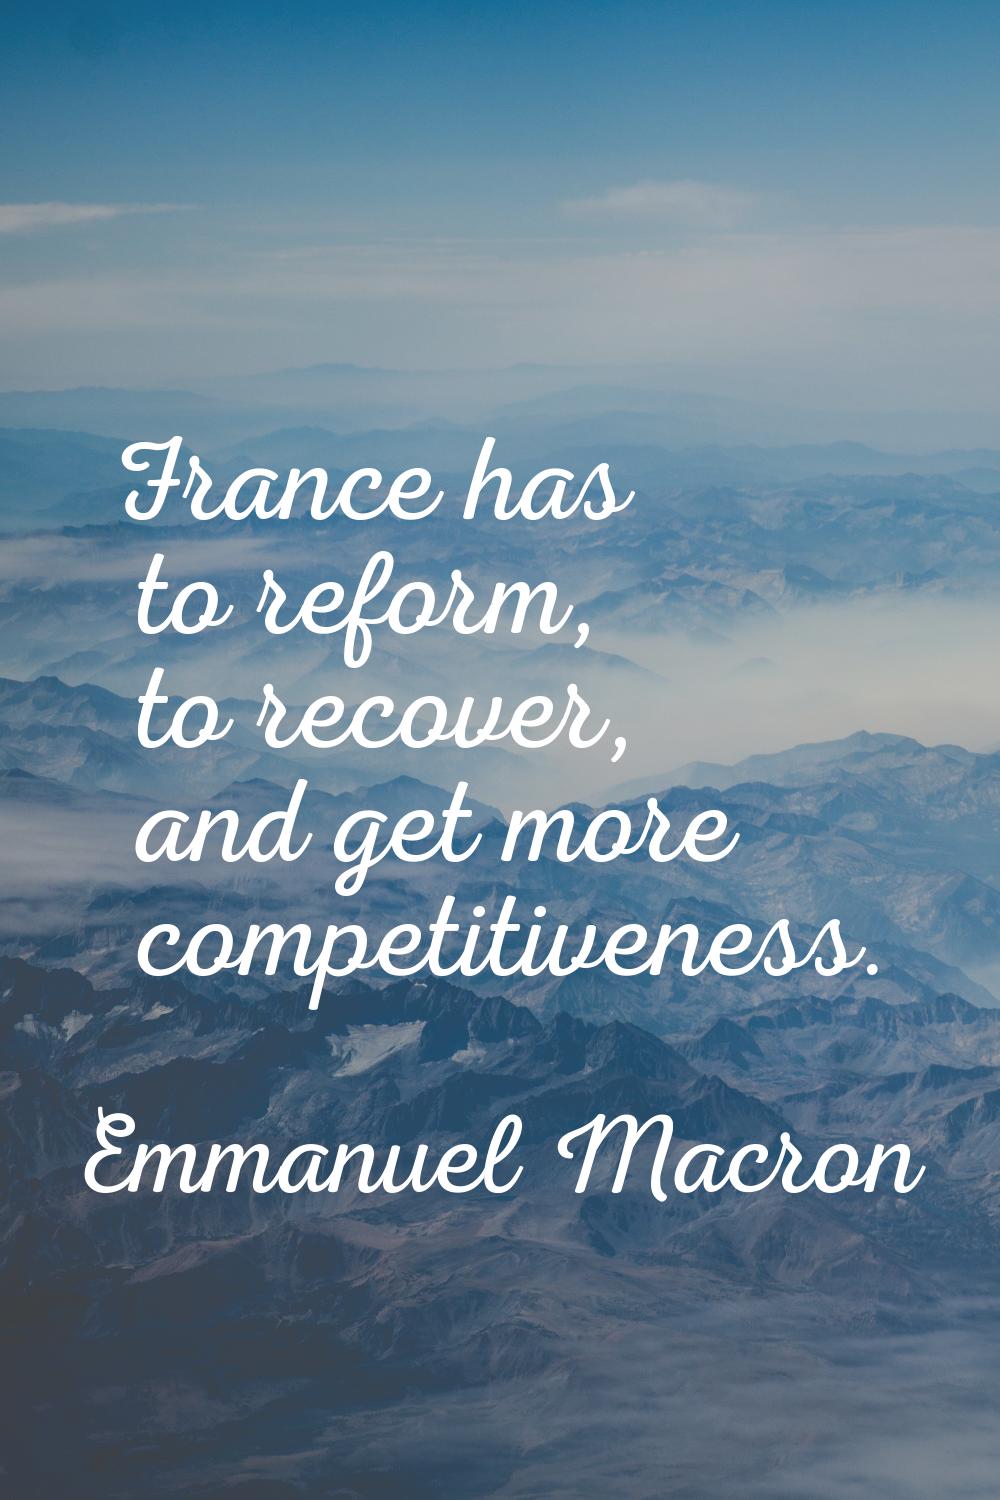 France has to reform, to recover, and get more competitiveness.